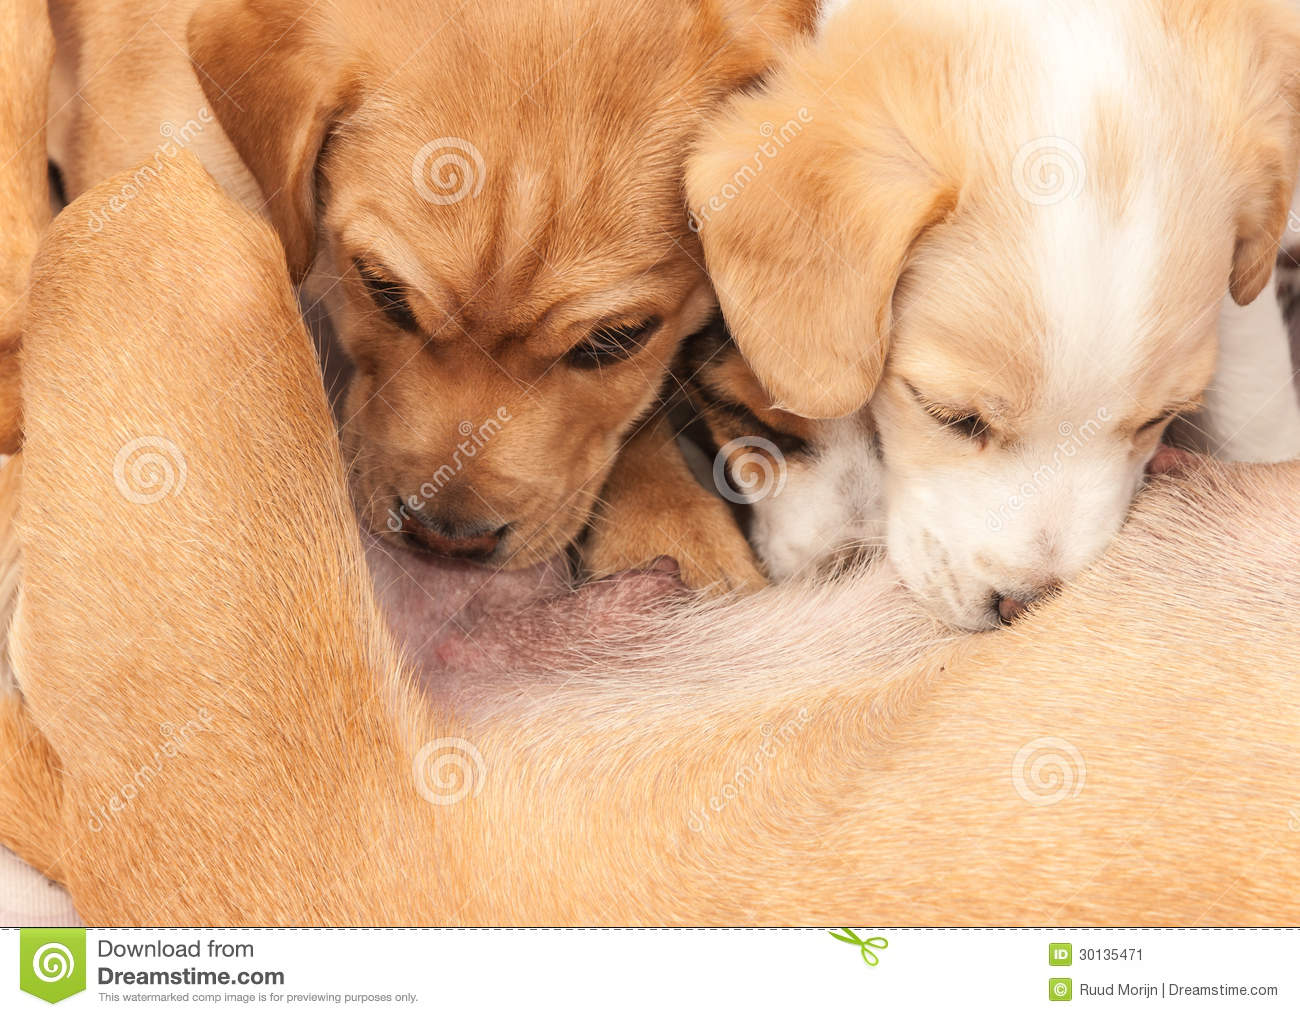 Closeup Of Two Drinking Puppies Stock Image   Image  30135471